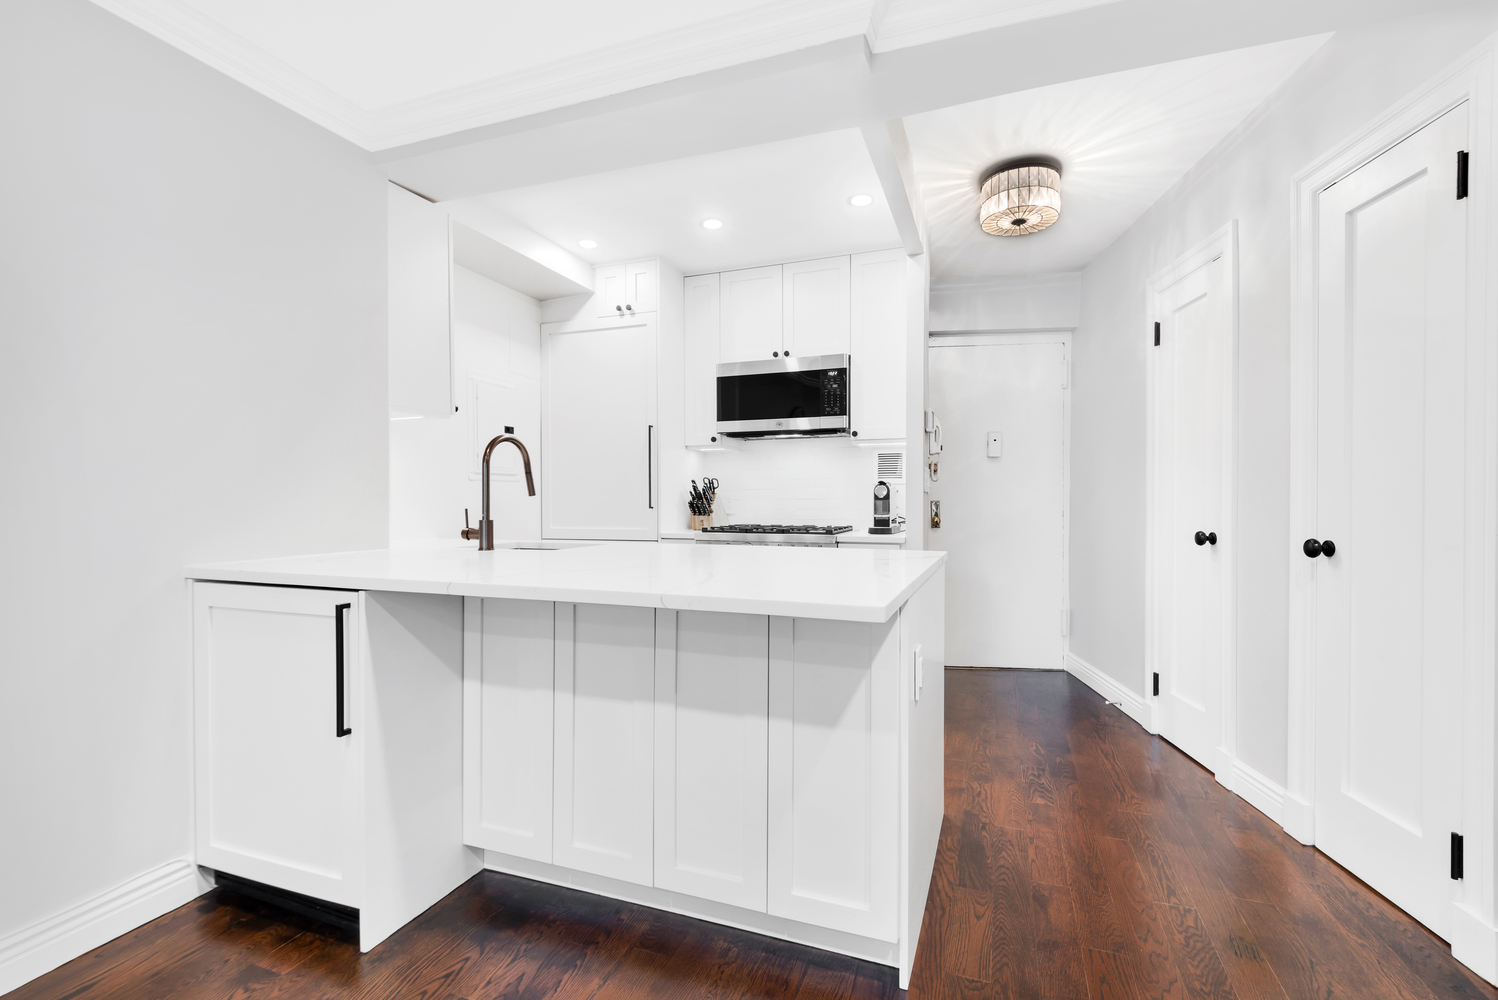 Remodeled kitchen with white countertops and cabinetry.